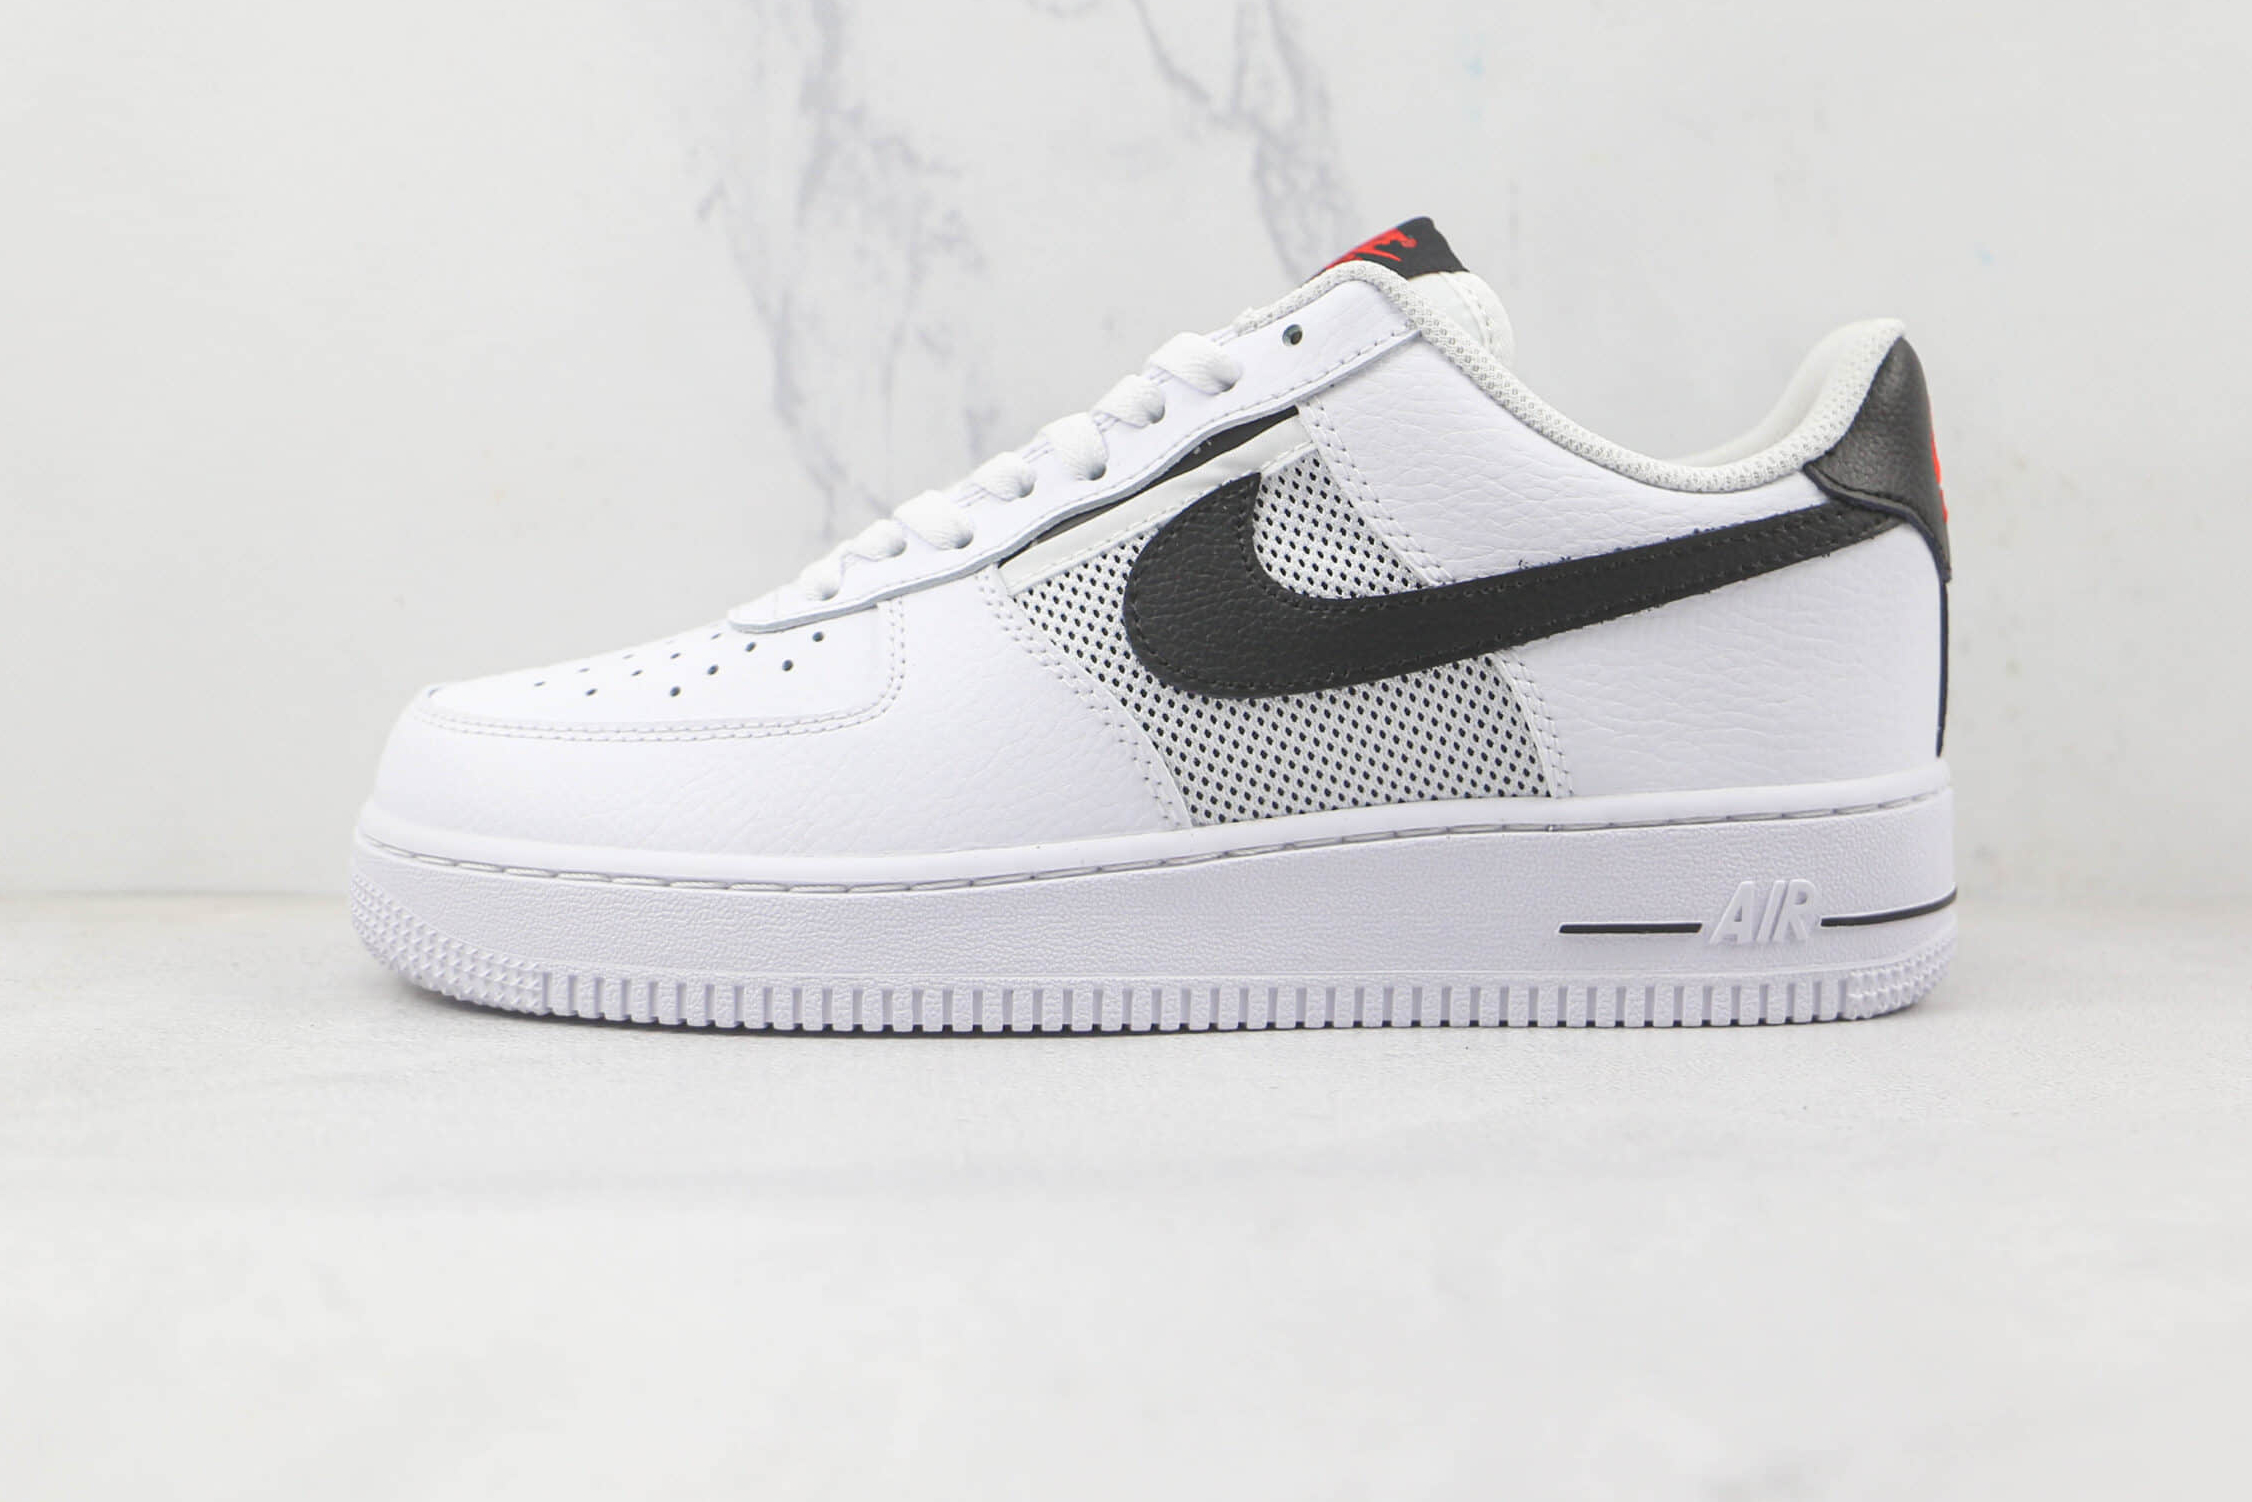 Nike Air Force 1 Low '07 LV8 'White Black' DH7567-100 - Supreme Style for Everyday Wear